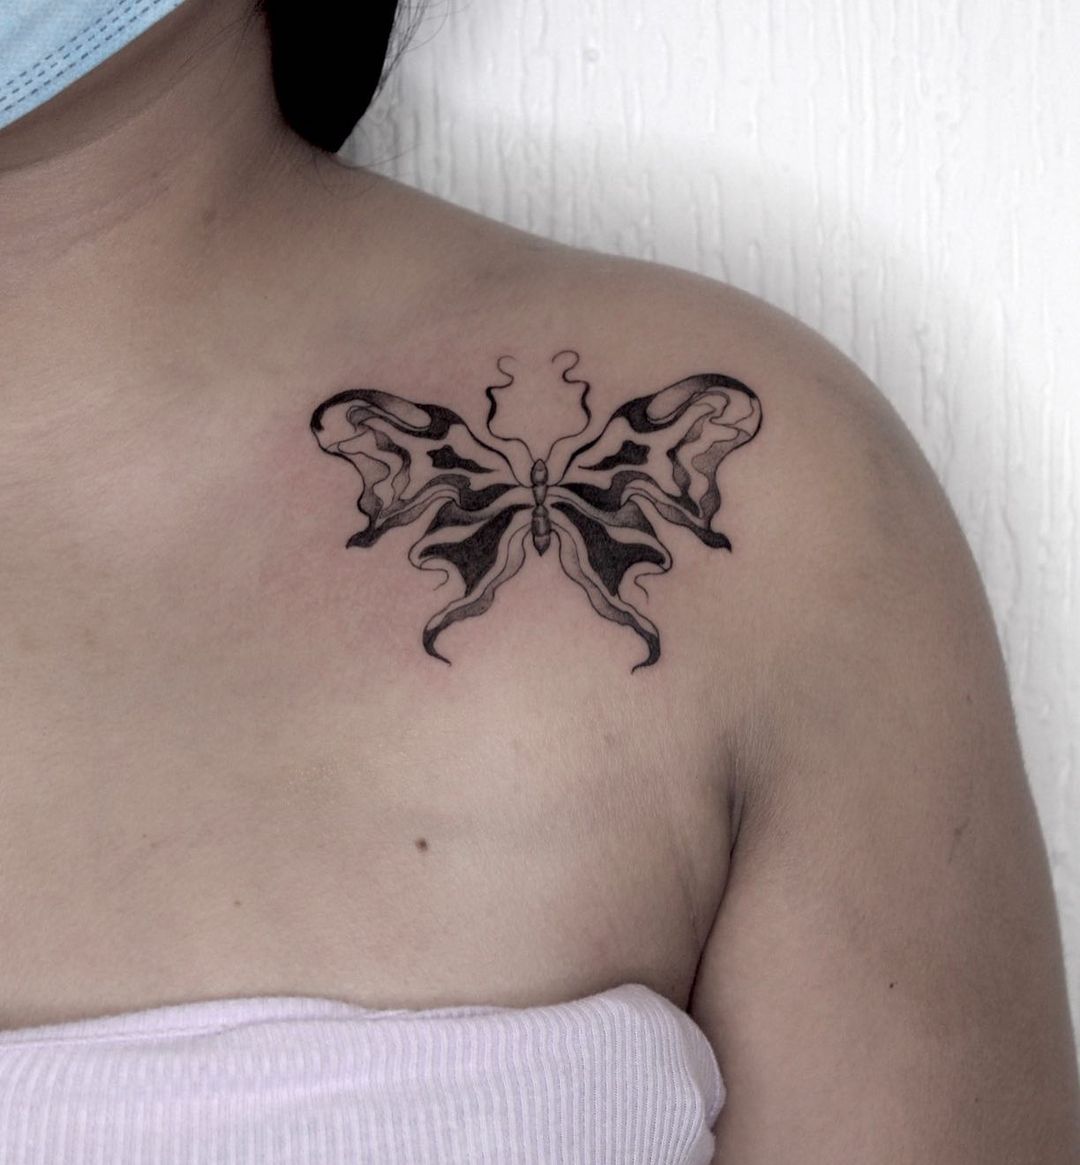 30+ Best Butterfly Tattoos Design You’ll Love To Get Next. Butterfly Tattoo on Shoulder